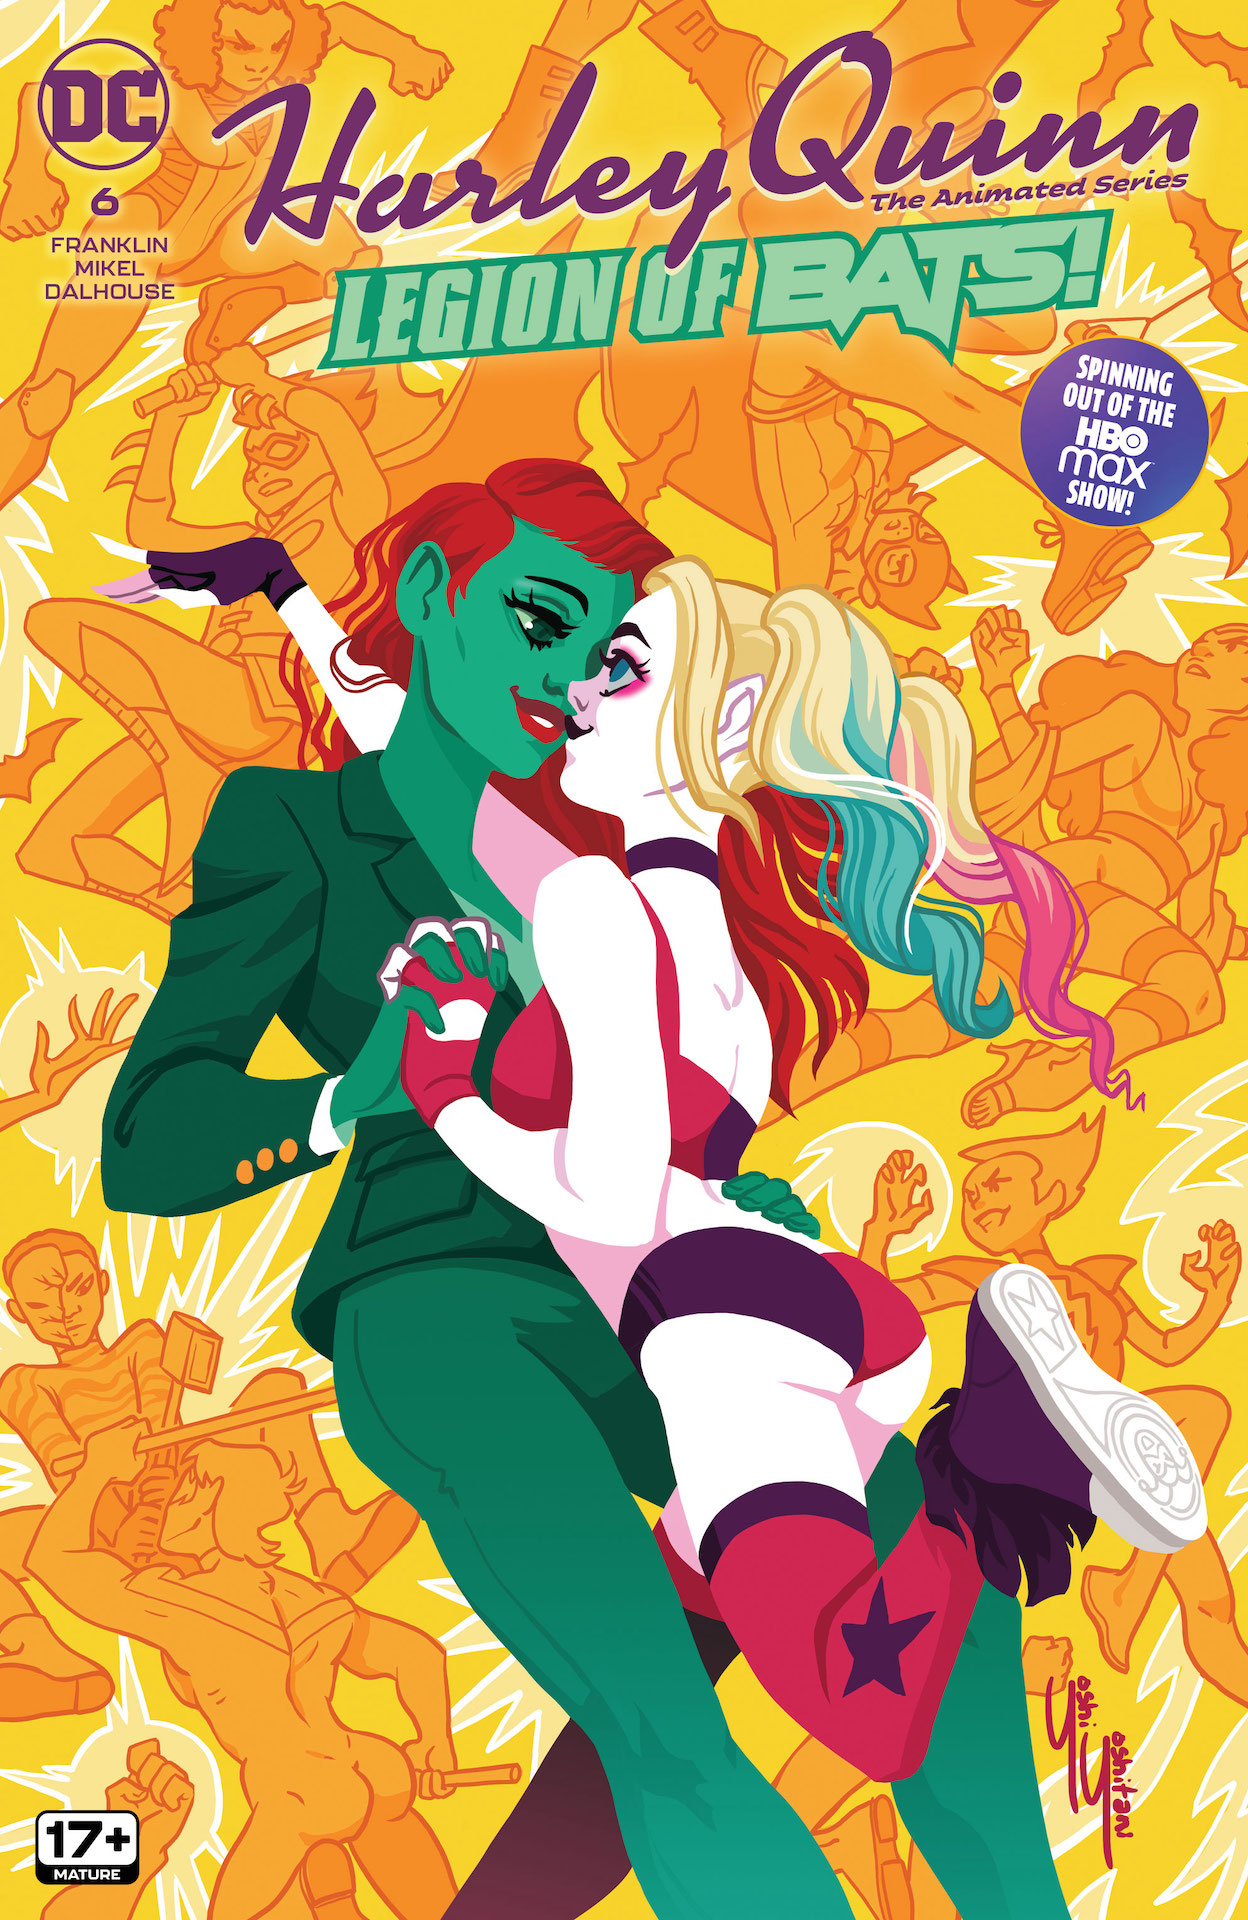 DC Preview: Harley Quinn: The Animated Series - Legion of Bats! #6